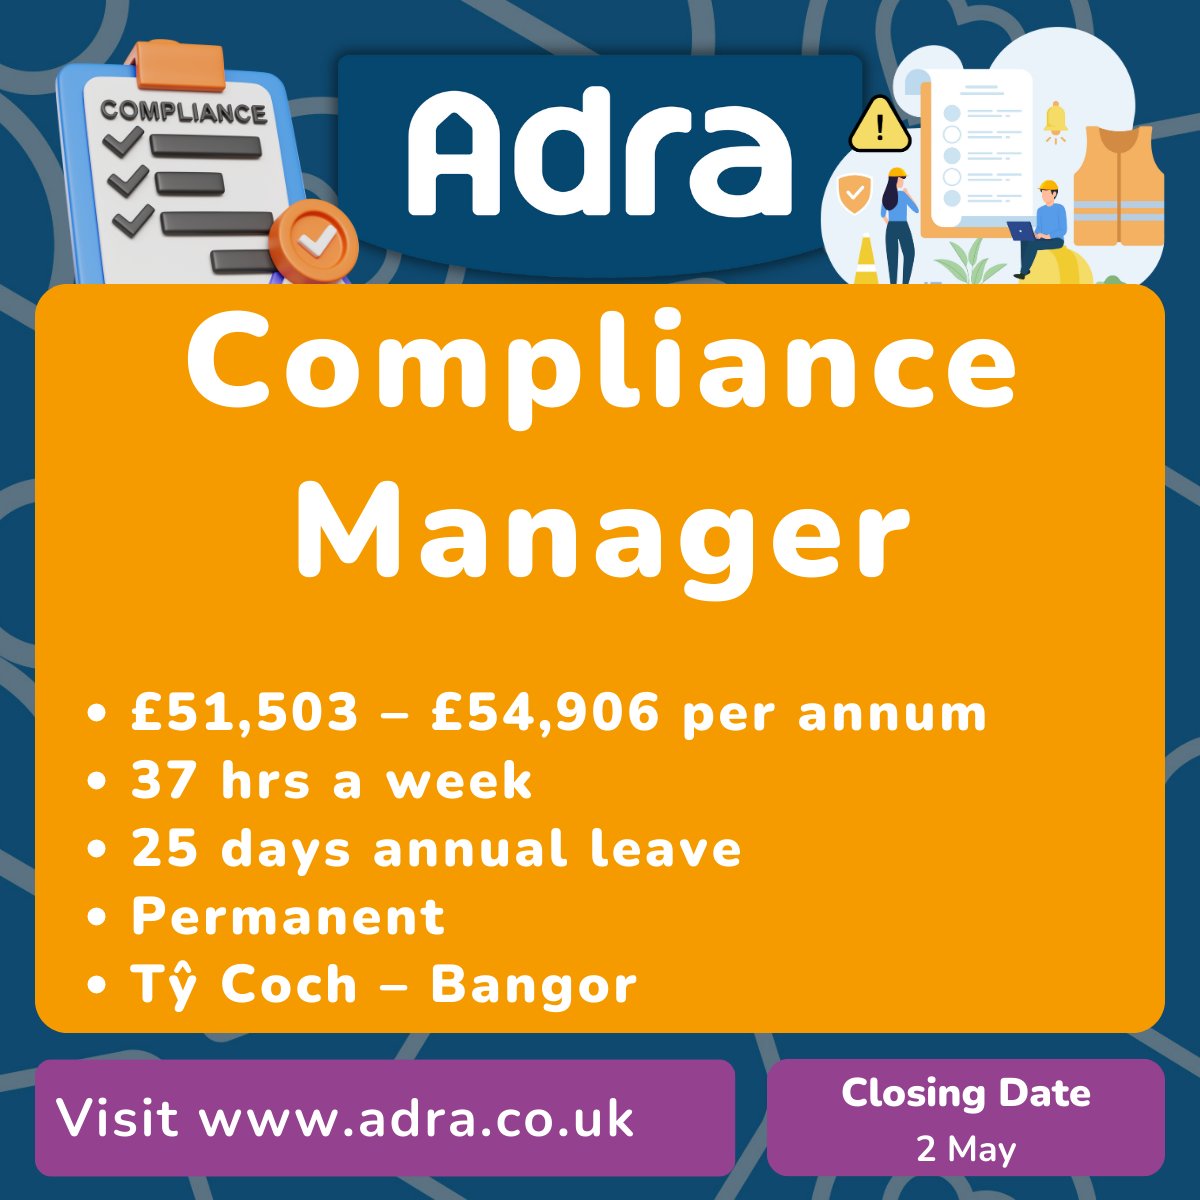 Have you seen our latest jobs? We have 3️⃣ new jobs live on our website at the moment We are looking for a Compliance Manager to join our Assets team. Take a look ⤵️ adra.co.uk/en/jobs/curren…